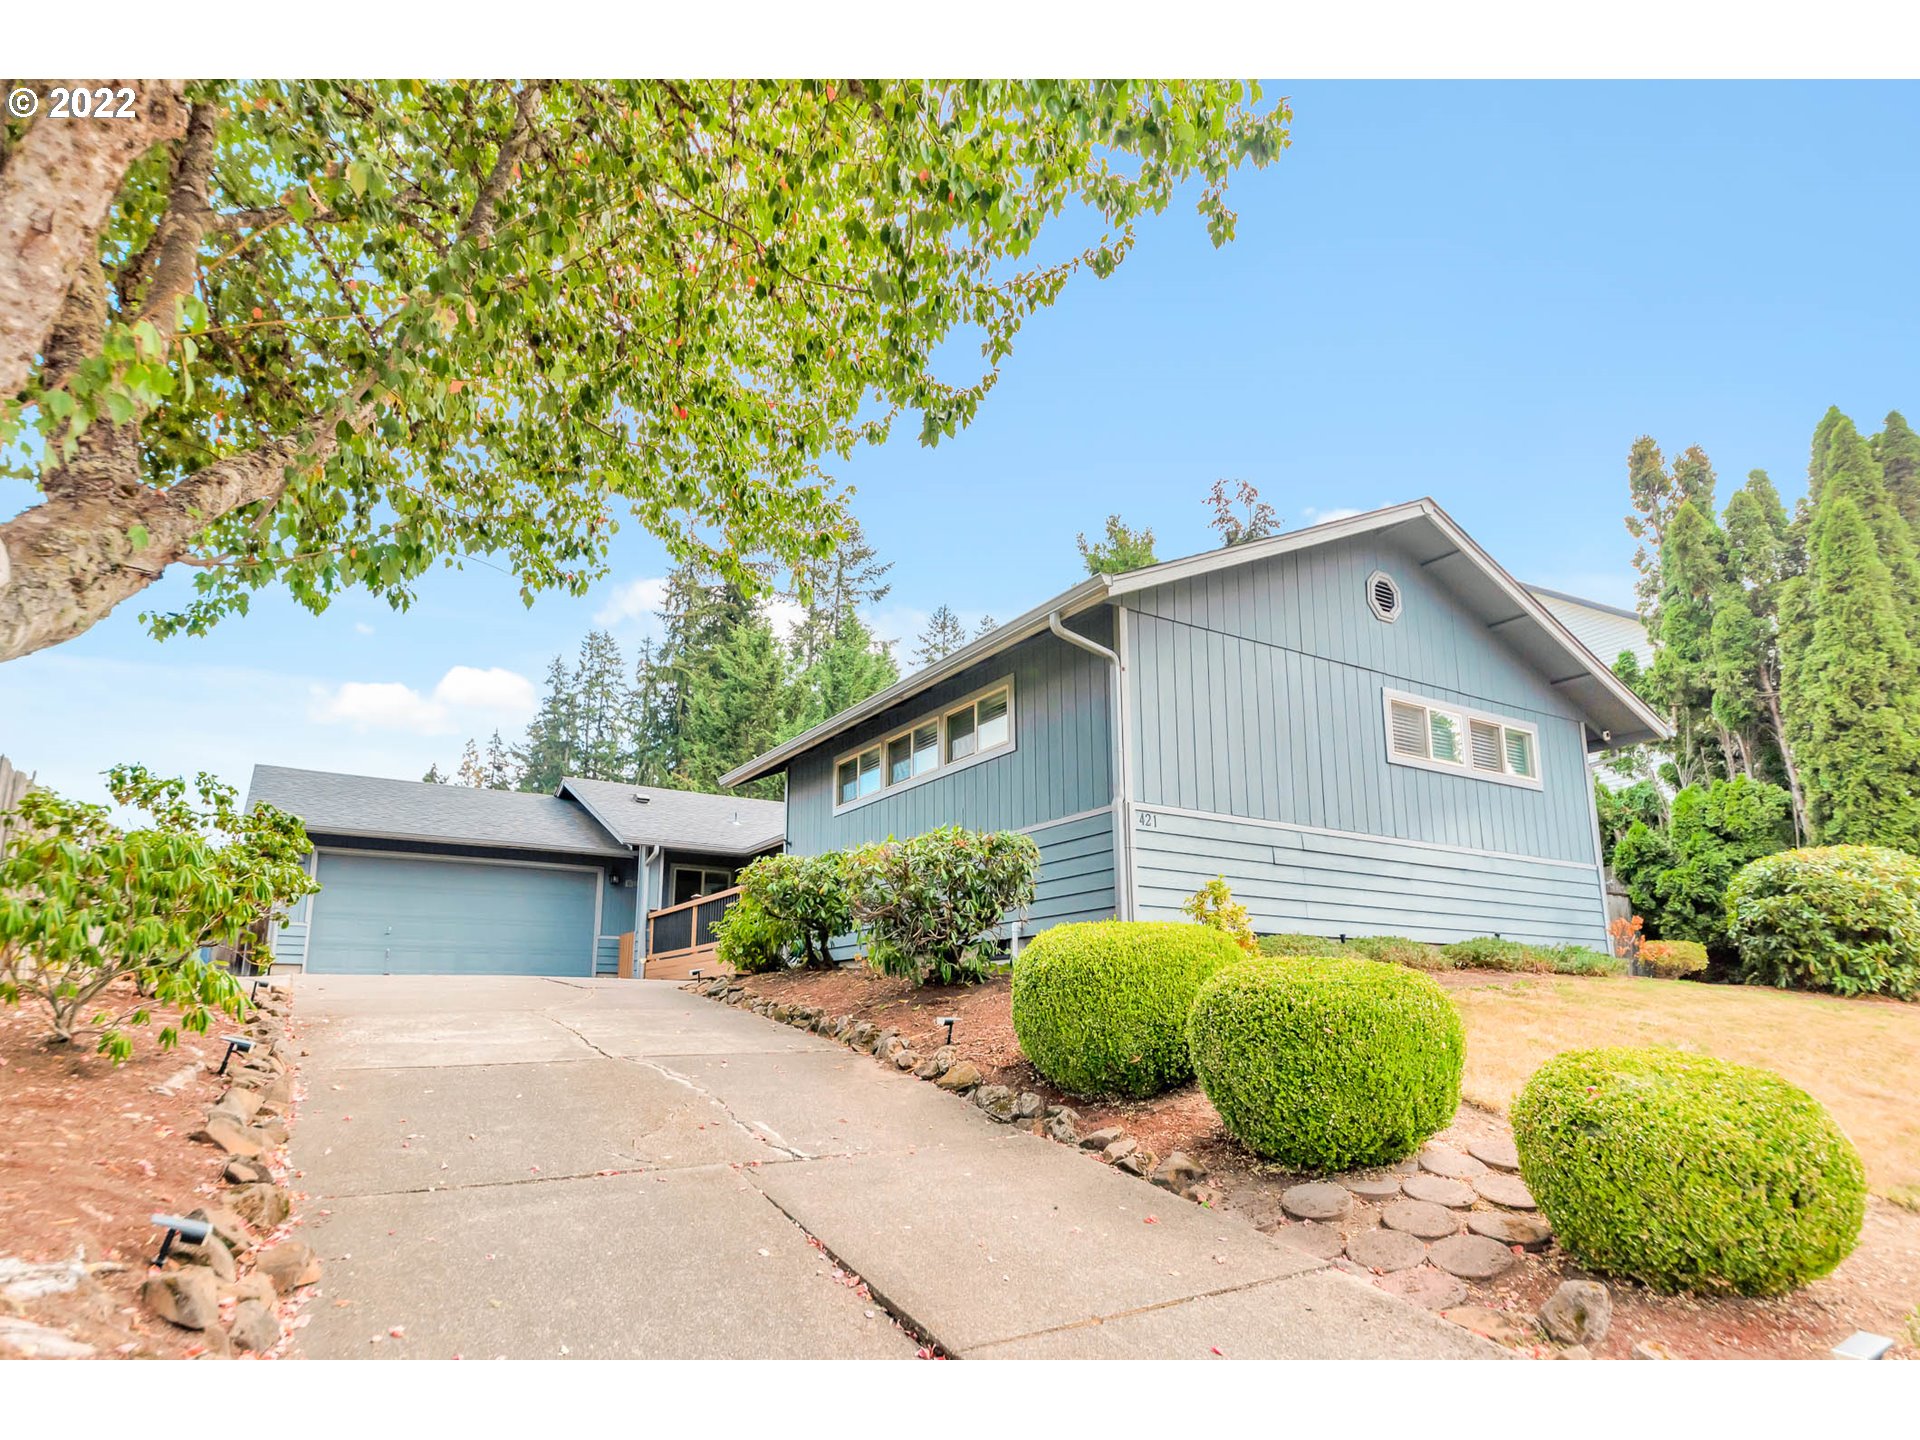 421 S 70TH PL, Springfield, OR 